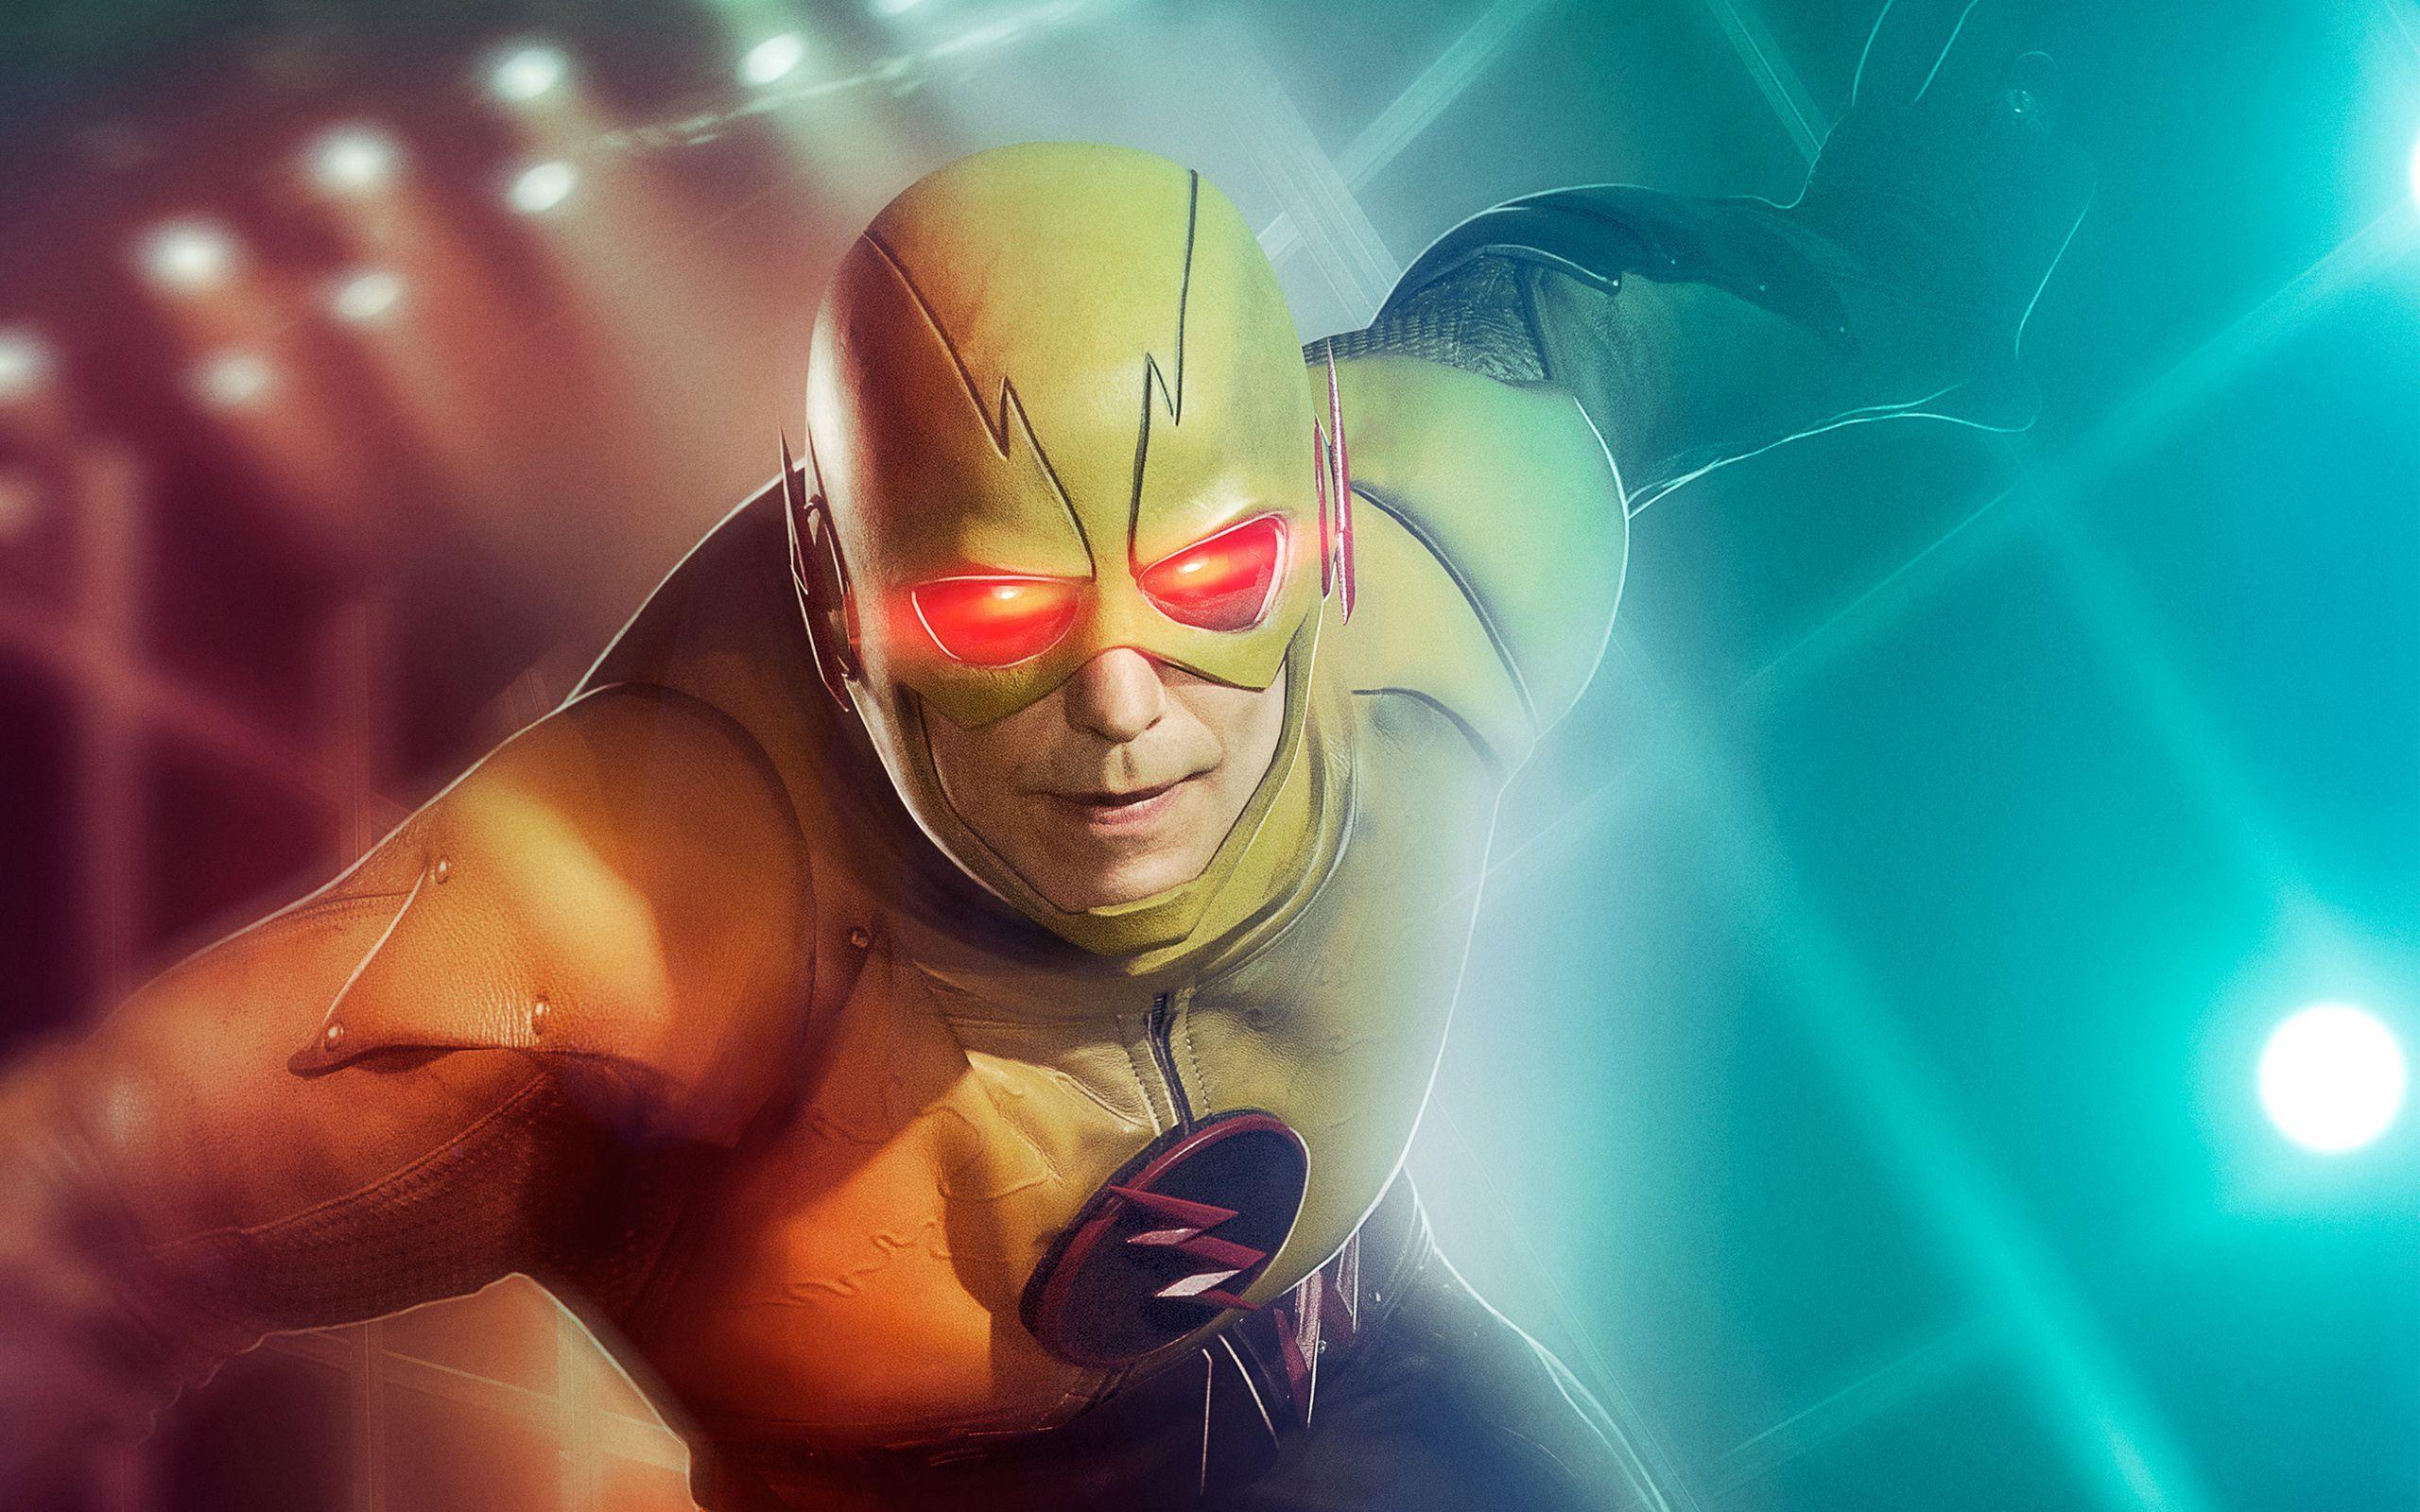 The Flash 4K Wallpaper. Awesome. Reverse flash, The Flash, Flash